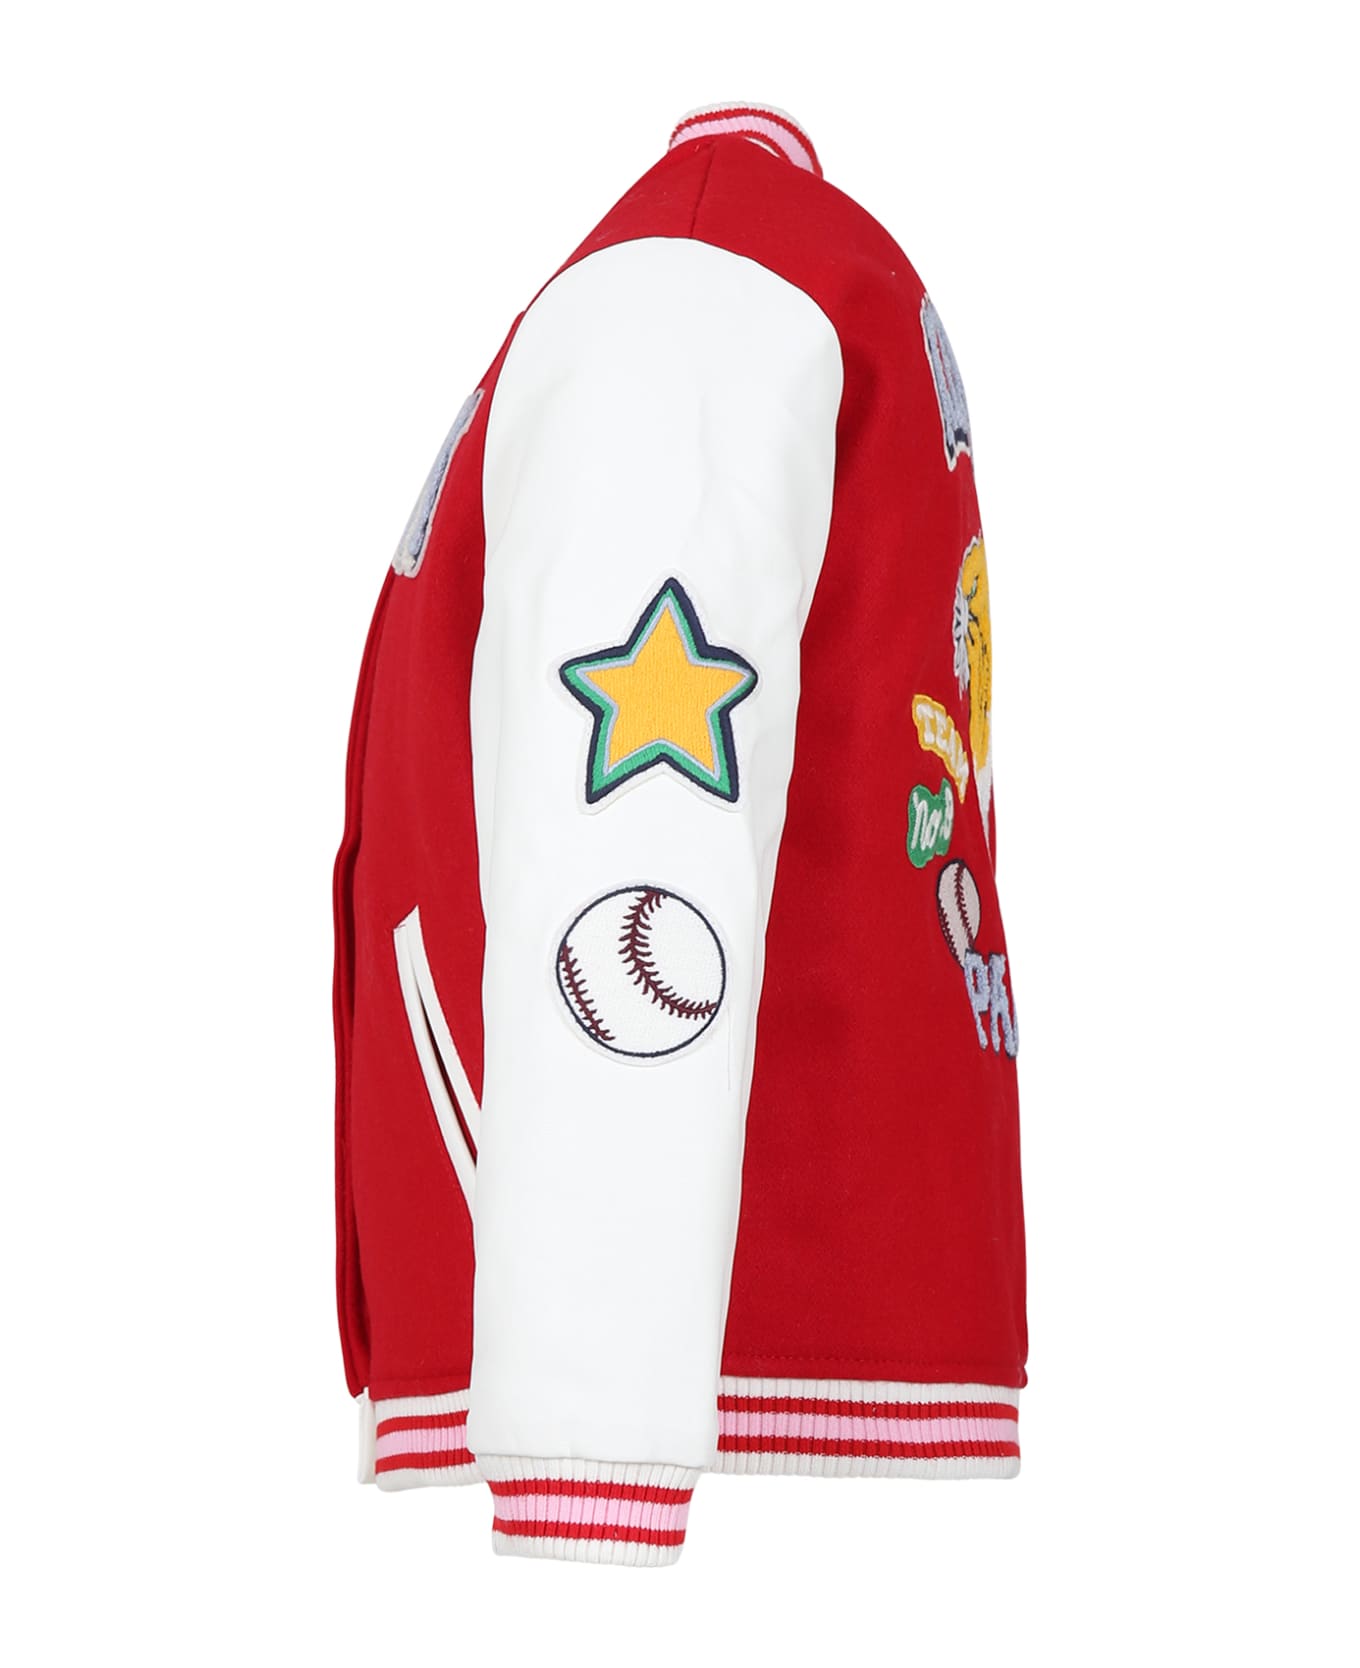 Kenzo Kids Red Jacket For Girl With Logo And Tiger - RED コート＆ジャケット